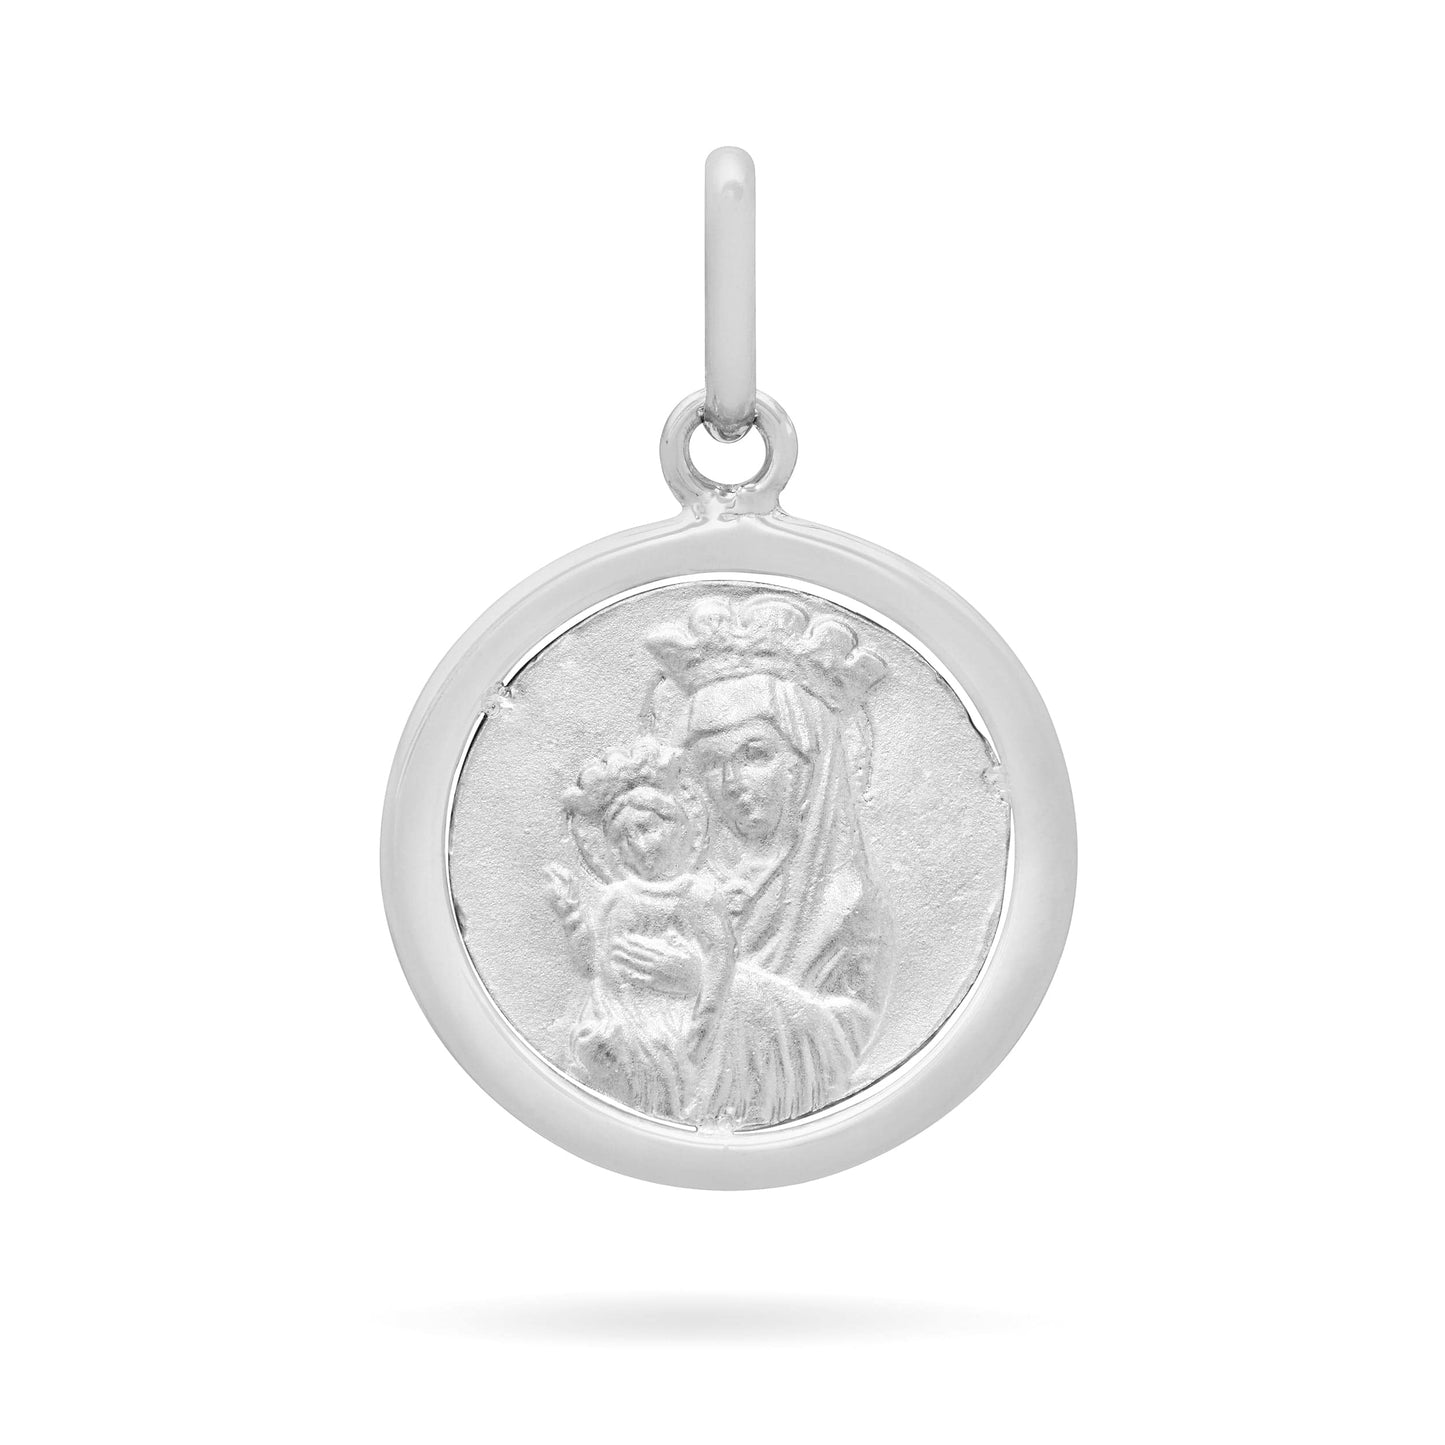 MONDO CATTOLICO Medal 15 mm (0.59 in) Round Sterling Silver Peace Symbol Medal and Mater Ecclesiae